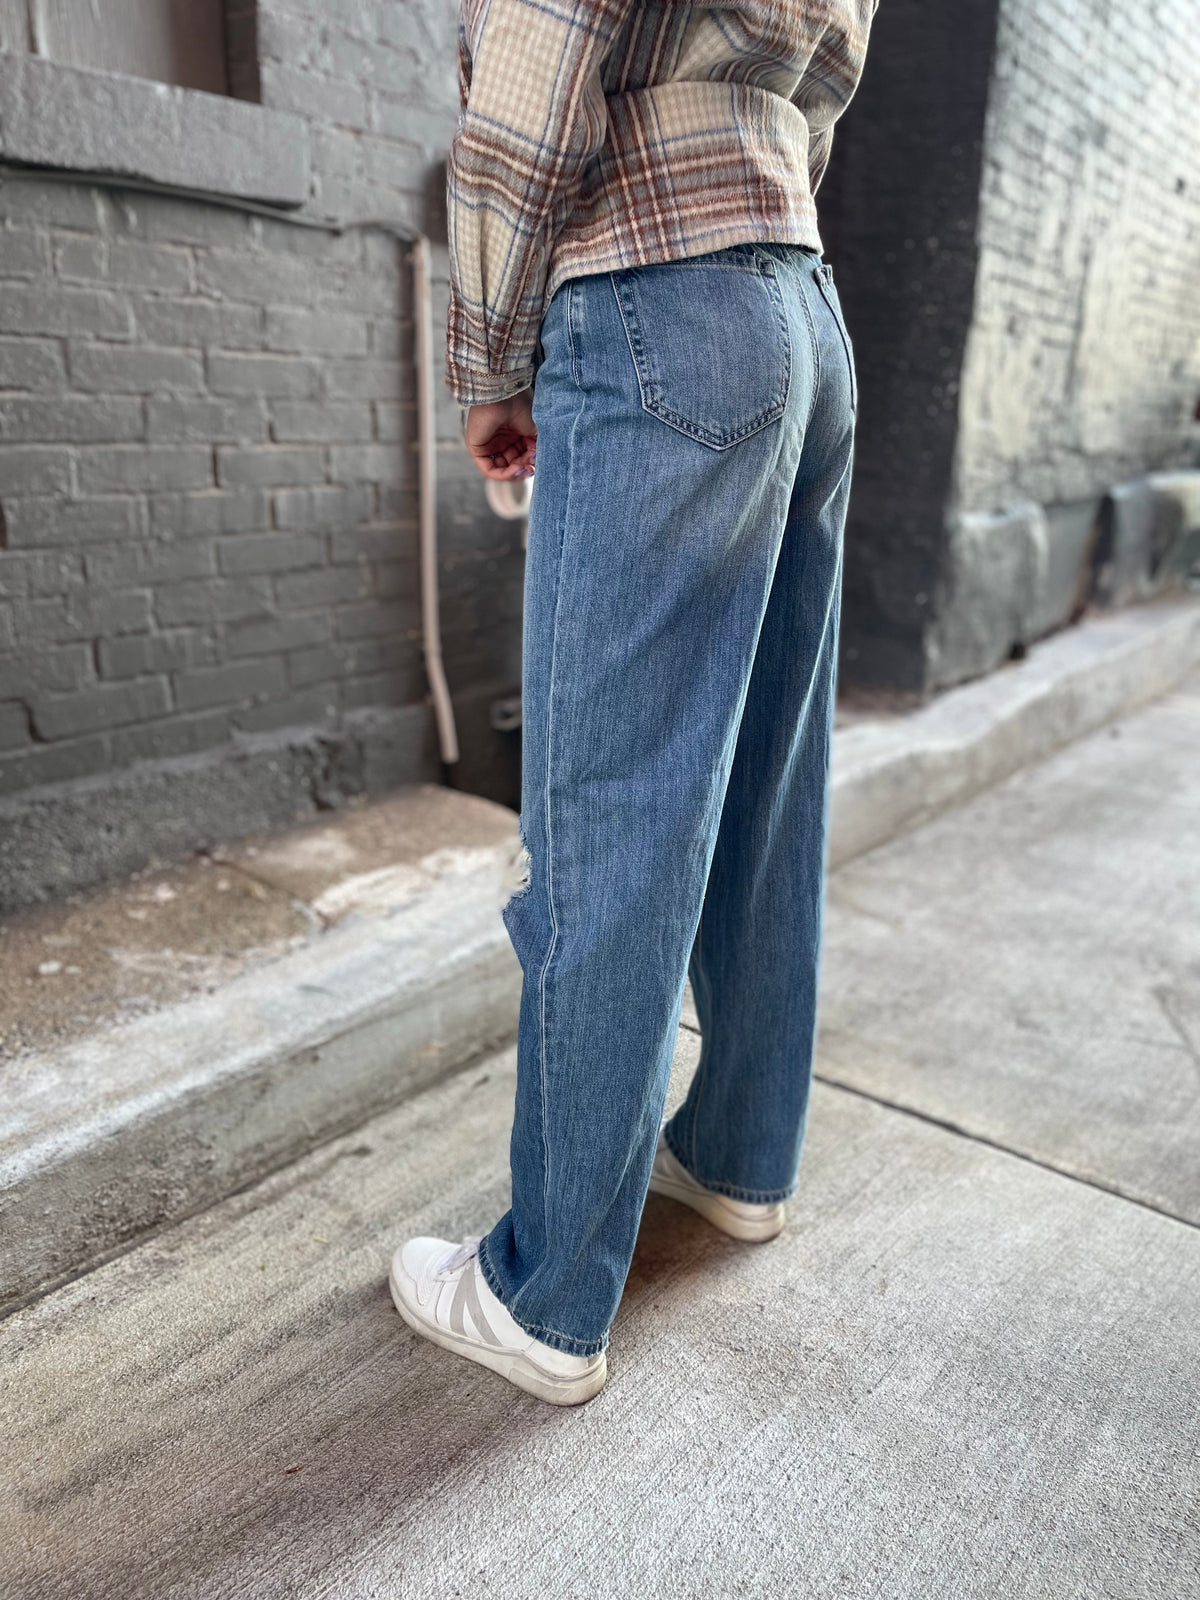 90’s Style Baggy Jeans